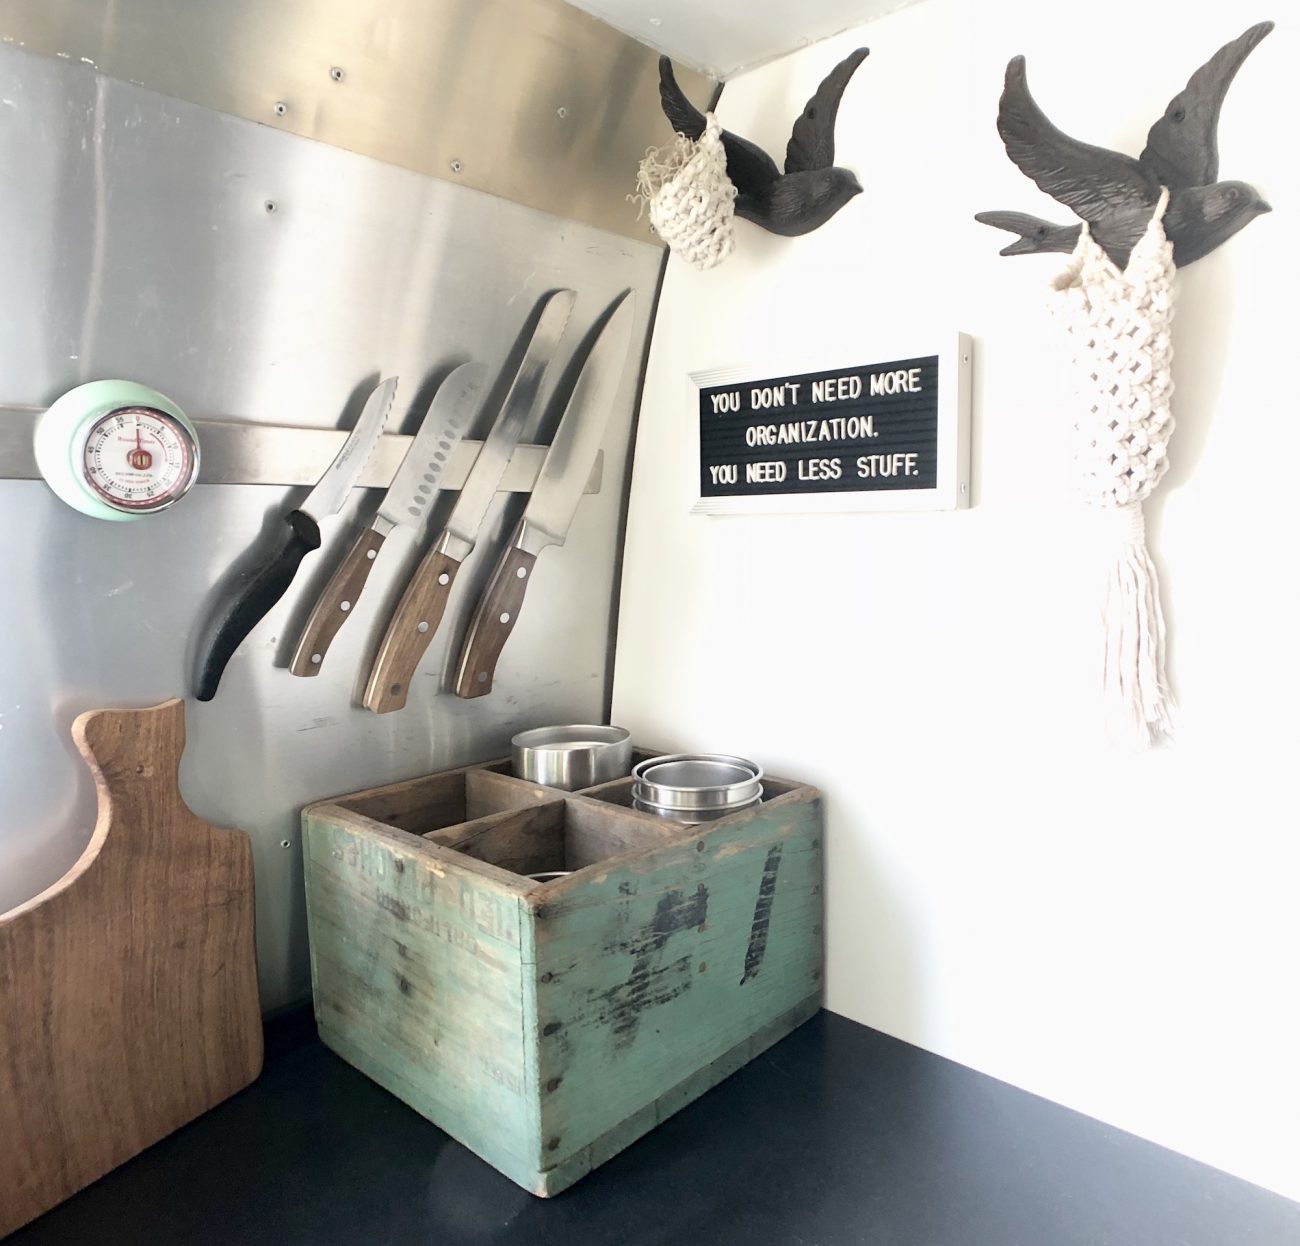 Knives in the Airstream